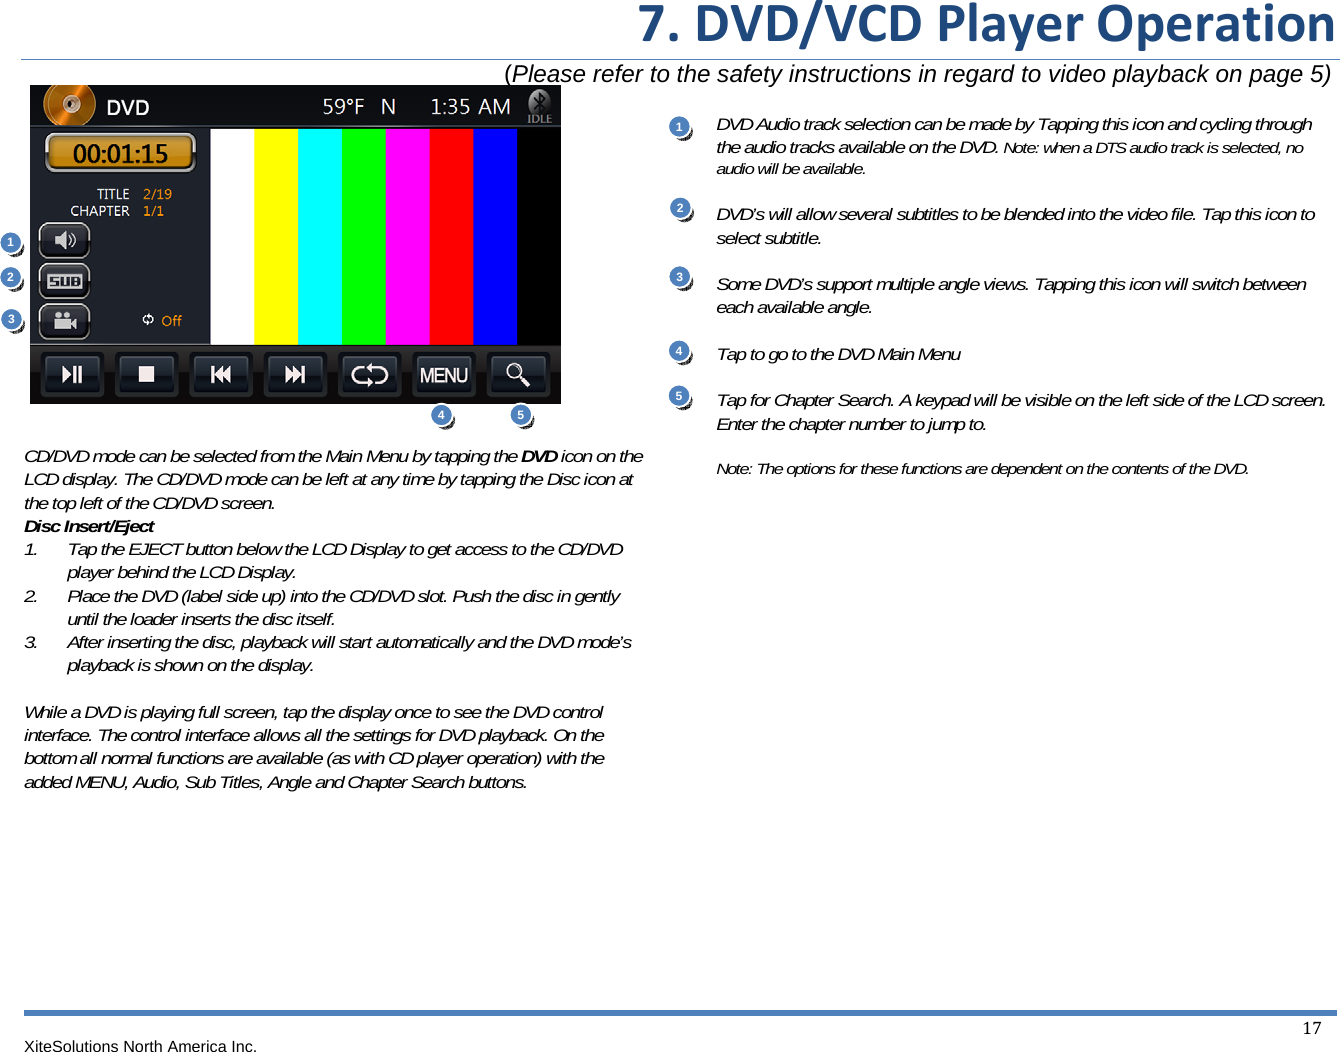 7.DVD/VCDPlayerOperation                                                                       (Please refer to the safety instructions in regard to video playback on page 5) XiteSolutions North America Inc.  17               CD/DVD mode can be selected from the Main Menu by tapping the DVD icon on the LCD display. The CD/DVD mode can be left at any time by tapping the Disc icon at the top left of the CD/DVD screen. Disc Insert/Eject 1. Tap the EJECT button below the LCD Display to get access to the CD/DVD player behind the LCD Display. 2. Place the DVD (label side up) into the CD/DVD slot. Push the disc in gently until the loader inserts the disc itself. 3. After inserting the disc, playback will start automatically and the DVD mode’s playback is shown on the display.  While a DVD is playing full screen, tap the display once to see the DVD control interface. The control interface allows all the settings for DVD playback. On the bottom all normal functions are available (as with CD player operation) with the added MENU, Audio, Sub Titles, Angle and Chapter Search buttons.           DVD Audio track selection can be made by Tapping this icon and cycling through the audio tracks available on the DVD. Note: when a DTS audio track is selected, no audio will be available.  DVD’s will allow several subtitles to be blended into the video file. Tap this icon to select subtitle.  Some DVD’s support multiple angle views. Tapping this icon will switch between each available angle.  Tap to go to the DVD Main Menu  Tap for Chapter Search. A keypad will be visible on the left side of the LCD screen. Enter the chapter number to jump to.  Note: The options for these functions are dependent on the contents of the DVD.                    11 22  3443 55